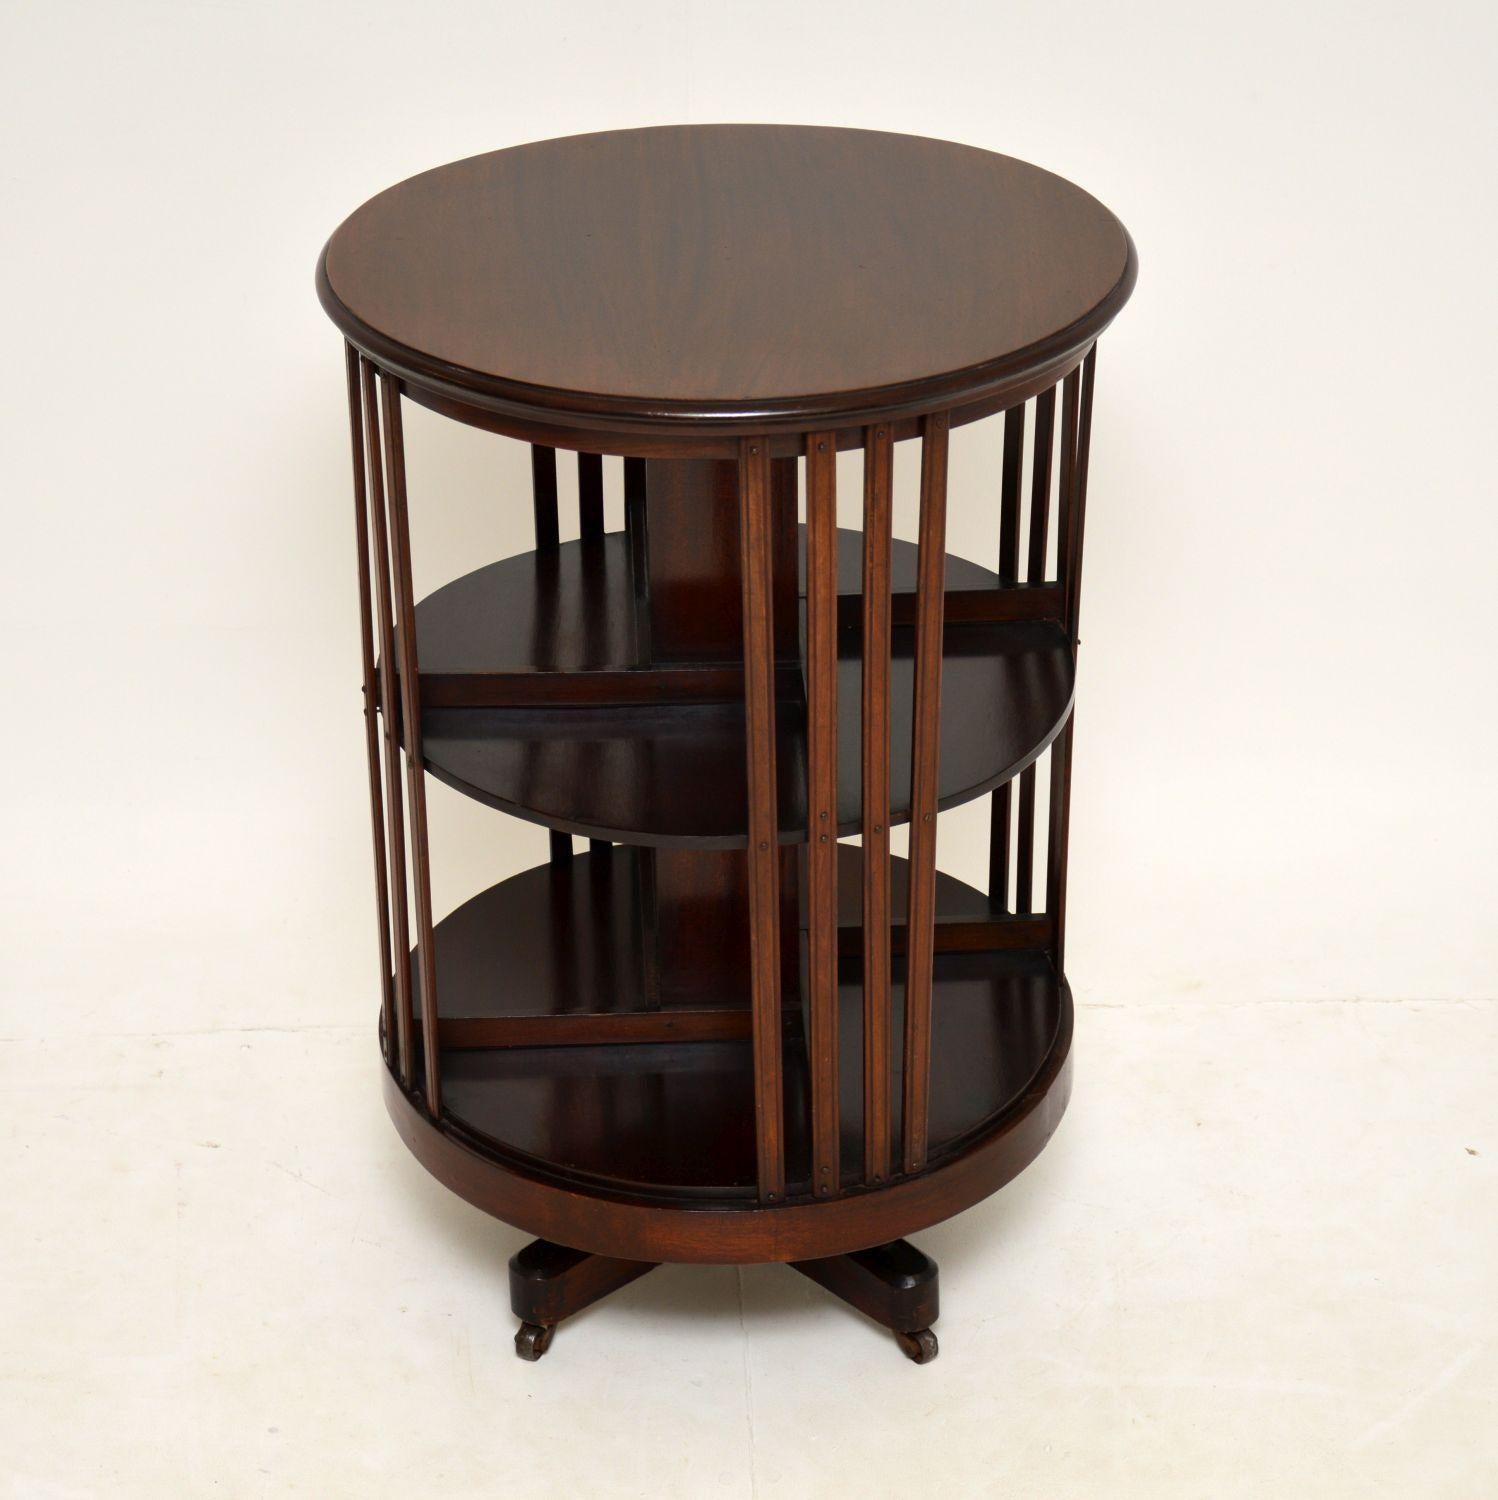 An unusual antique Edwardian revolving bookcase in mahogany. This dates from the 1900-1910 period.

It is of great quality and has an interesting cylindrical design. The mahogany has a lovely colour and patina, this is in great condition